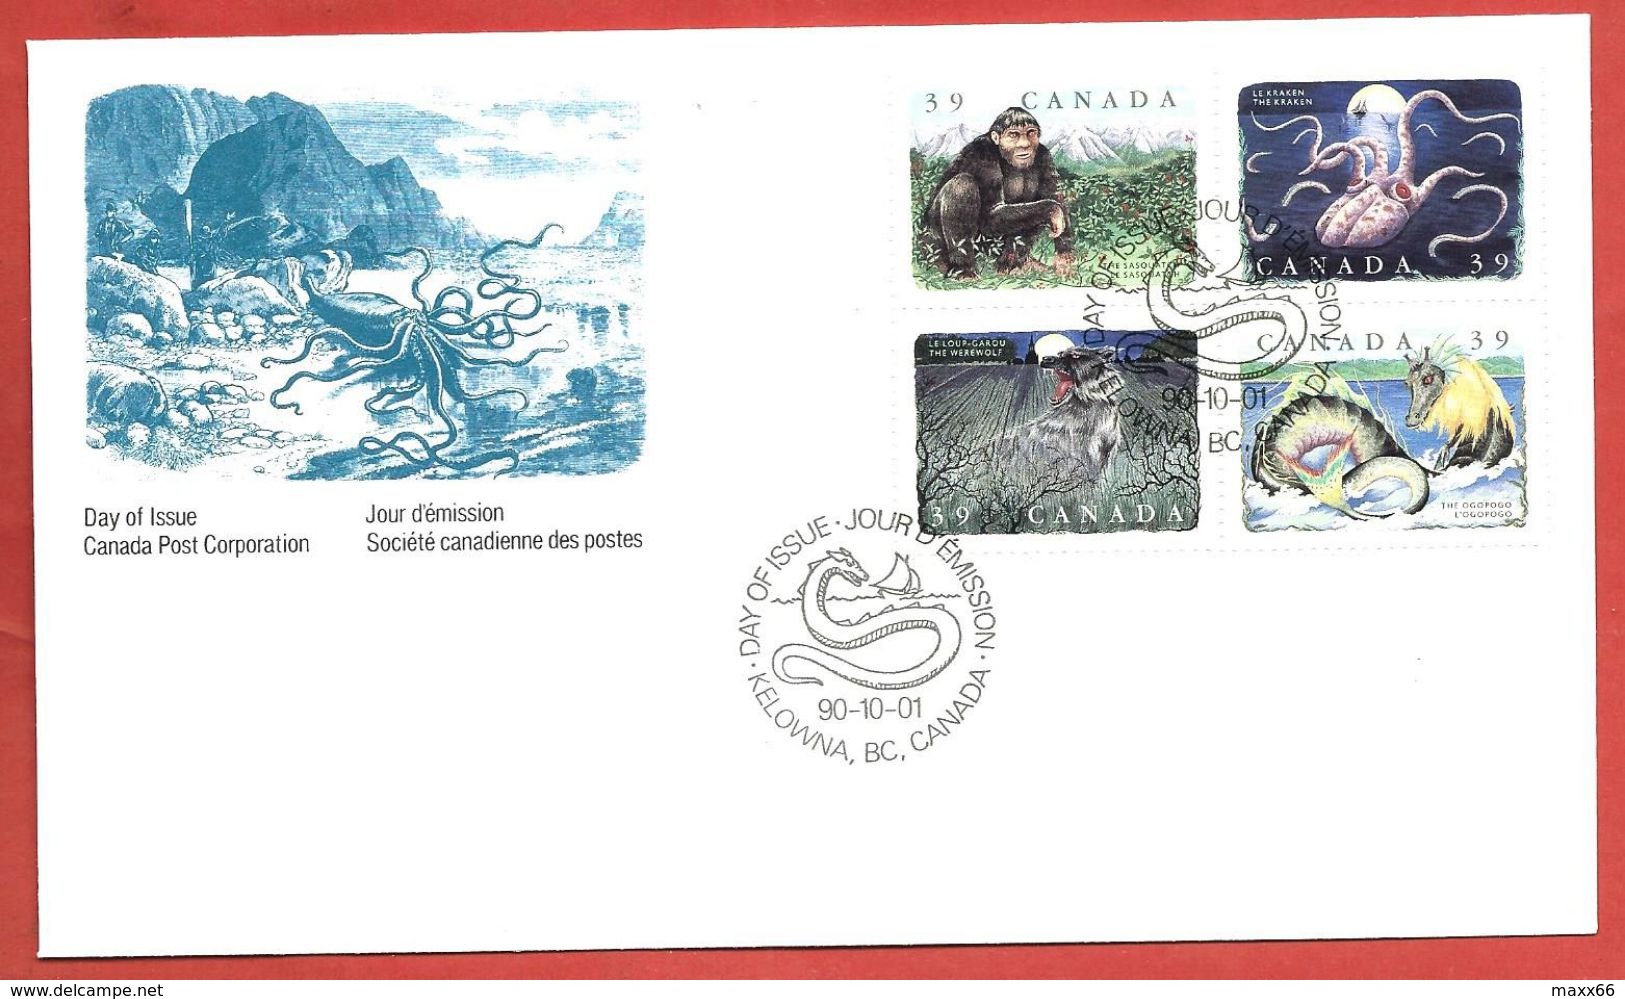 CANADA PRESENTATION PACK FDC - 1990 LEGENDARY CREATURES - Creatures Legendaires - With FDC - FOLDER - Commemorative Covers